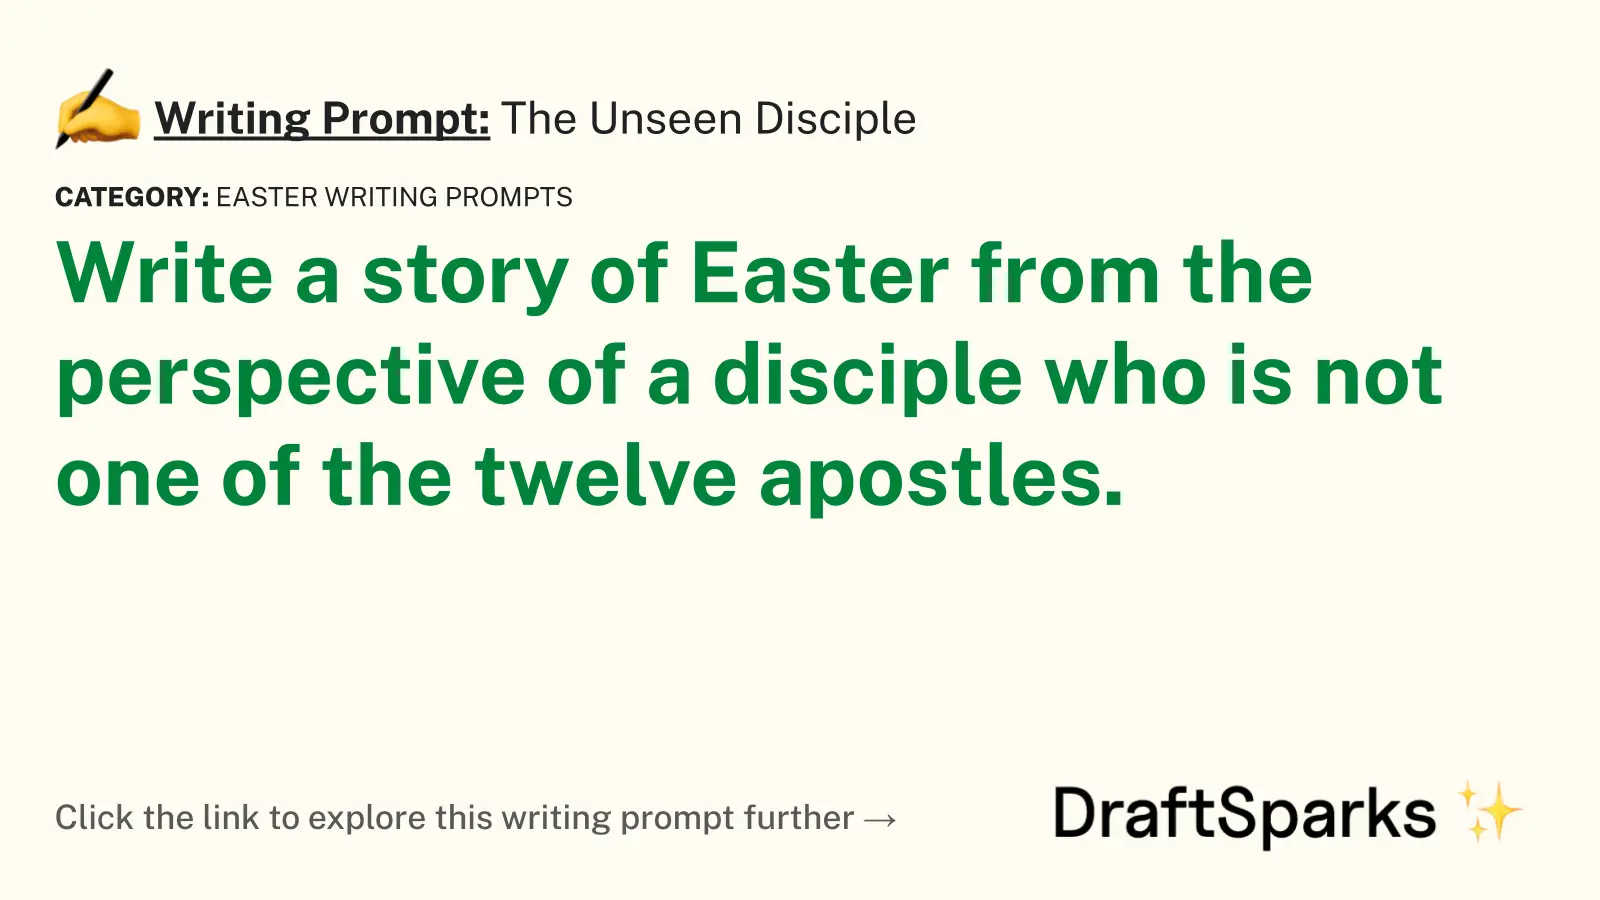 The Unseen Disciple